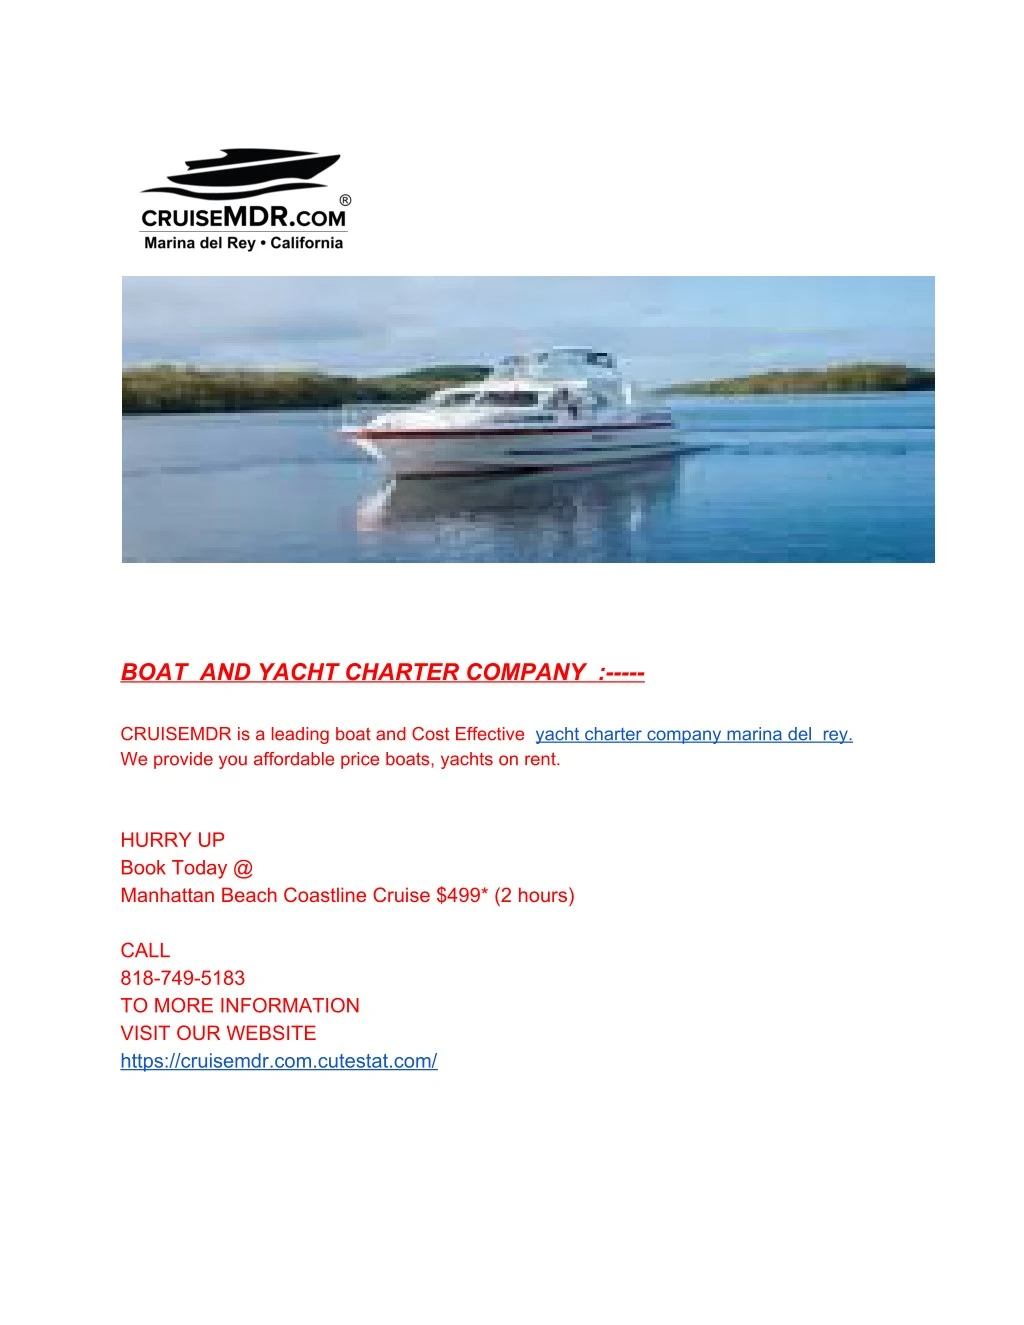 boat and yacht charter company cruisemdr